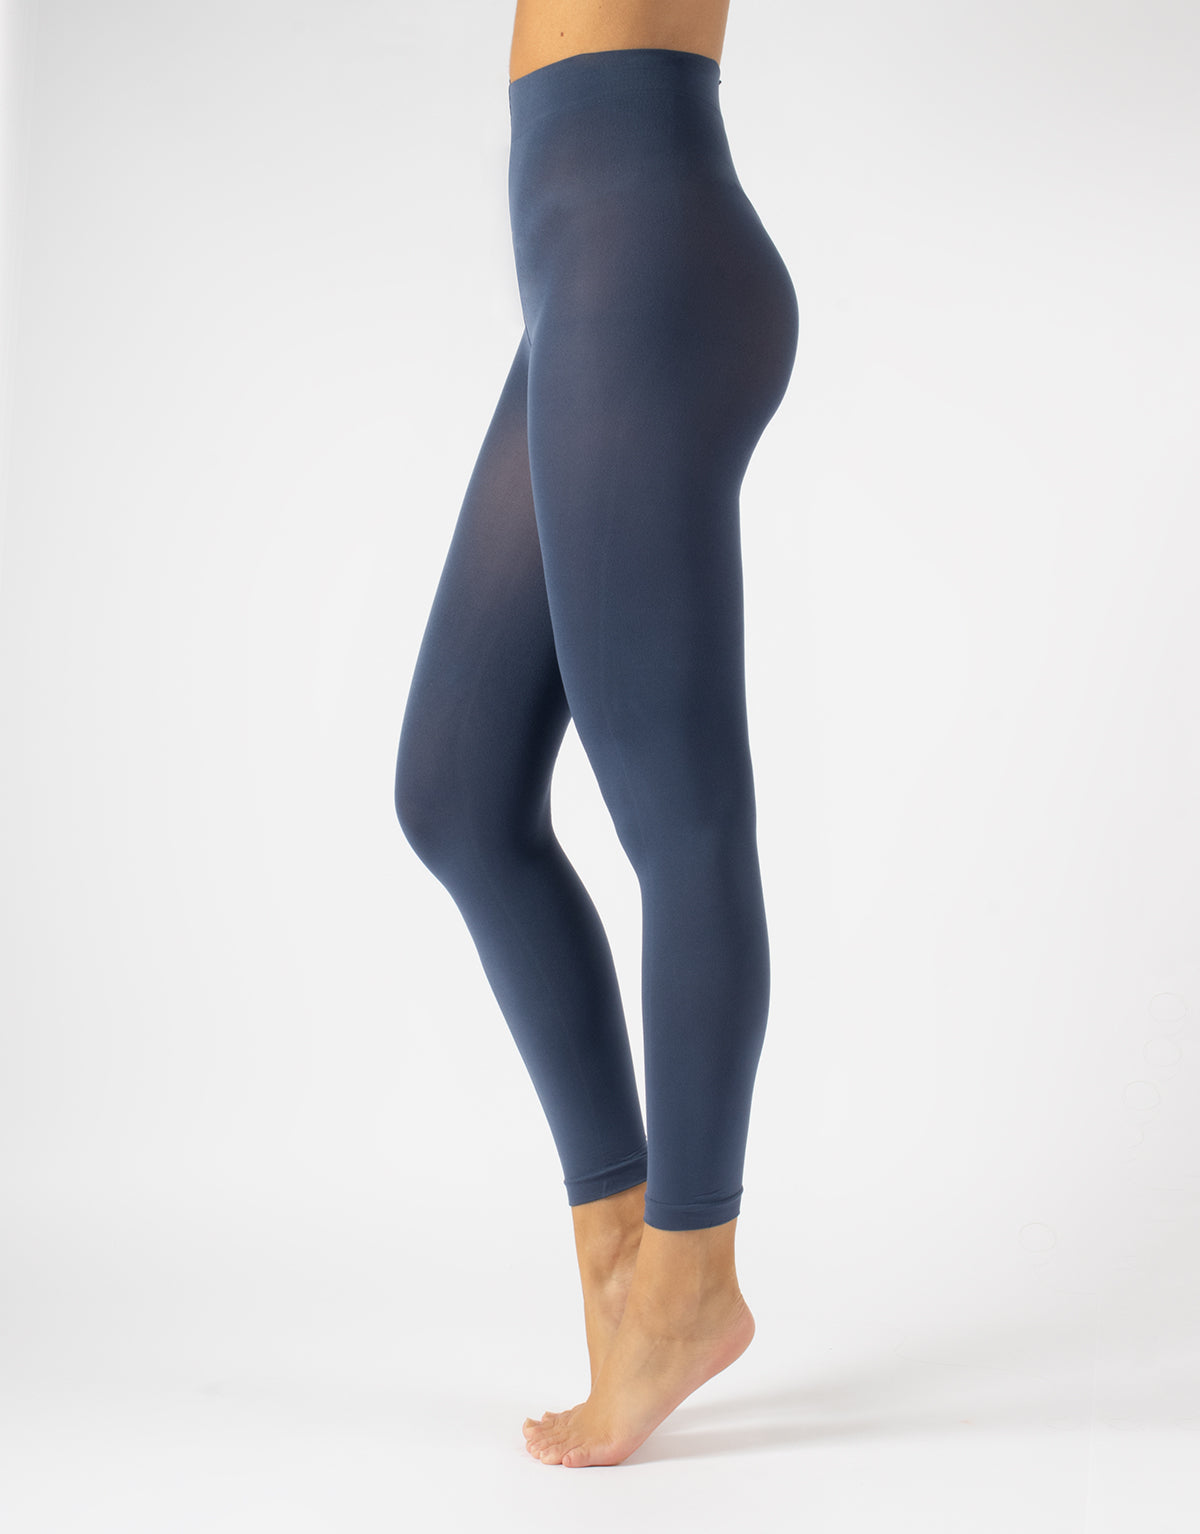 Calzitaly 80 Den Footless Tights - Plain denim blue (blue jeans) matte opaque footless tights with flat seams and cotton gusset.